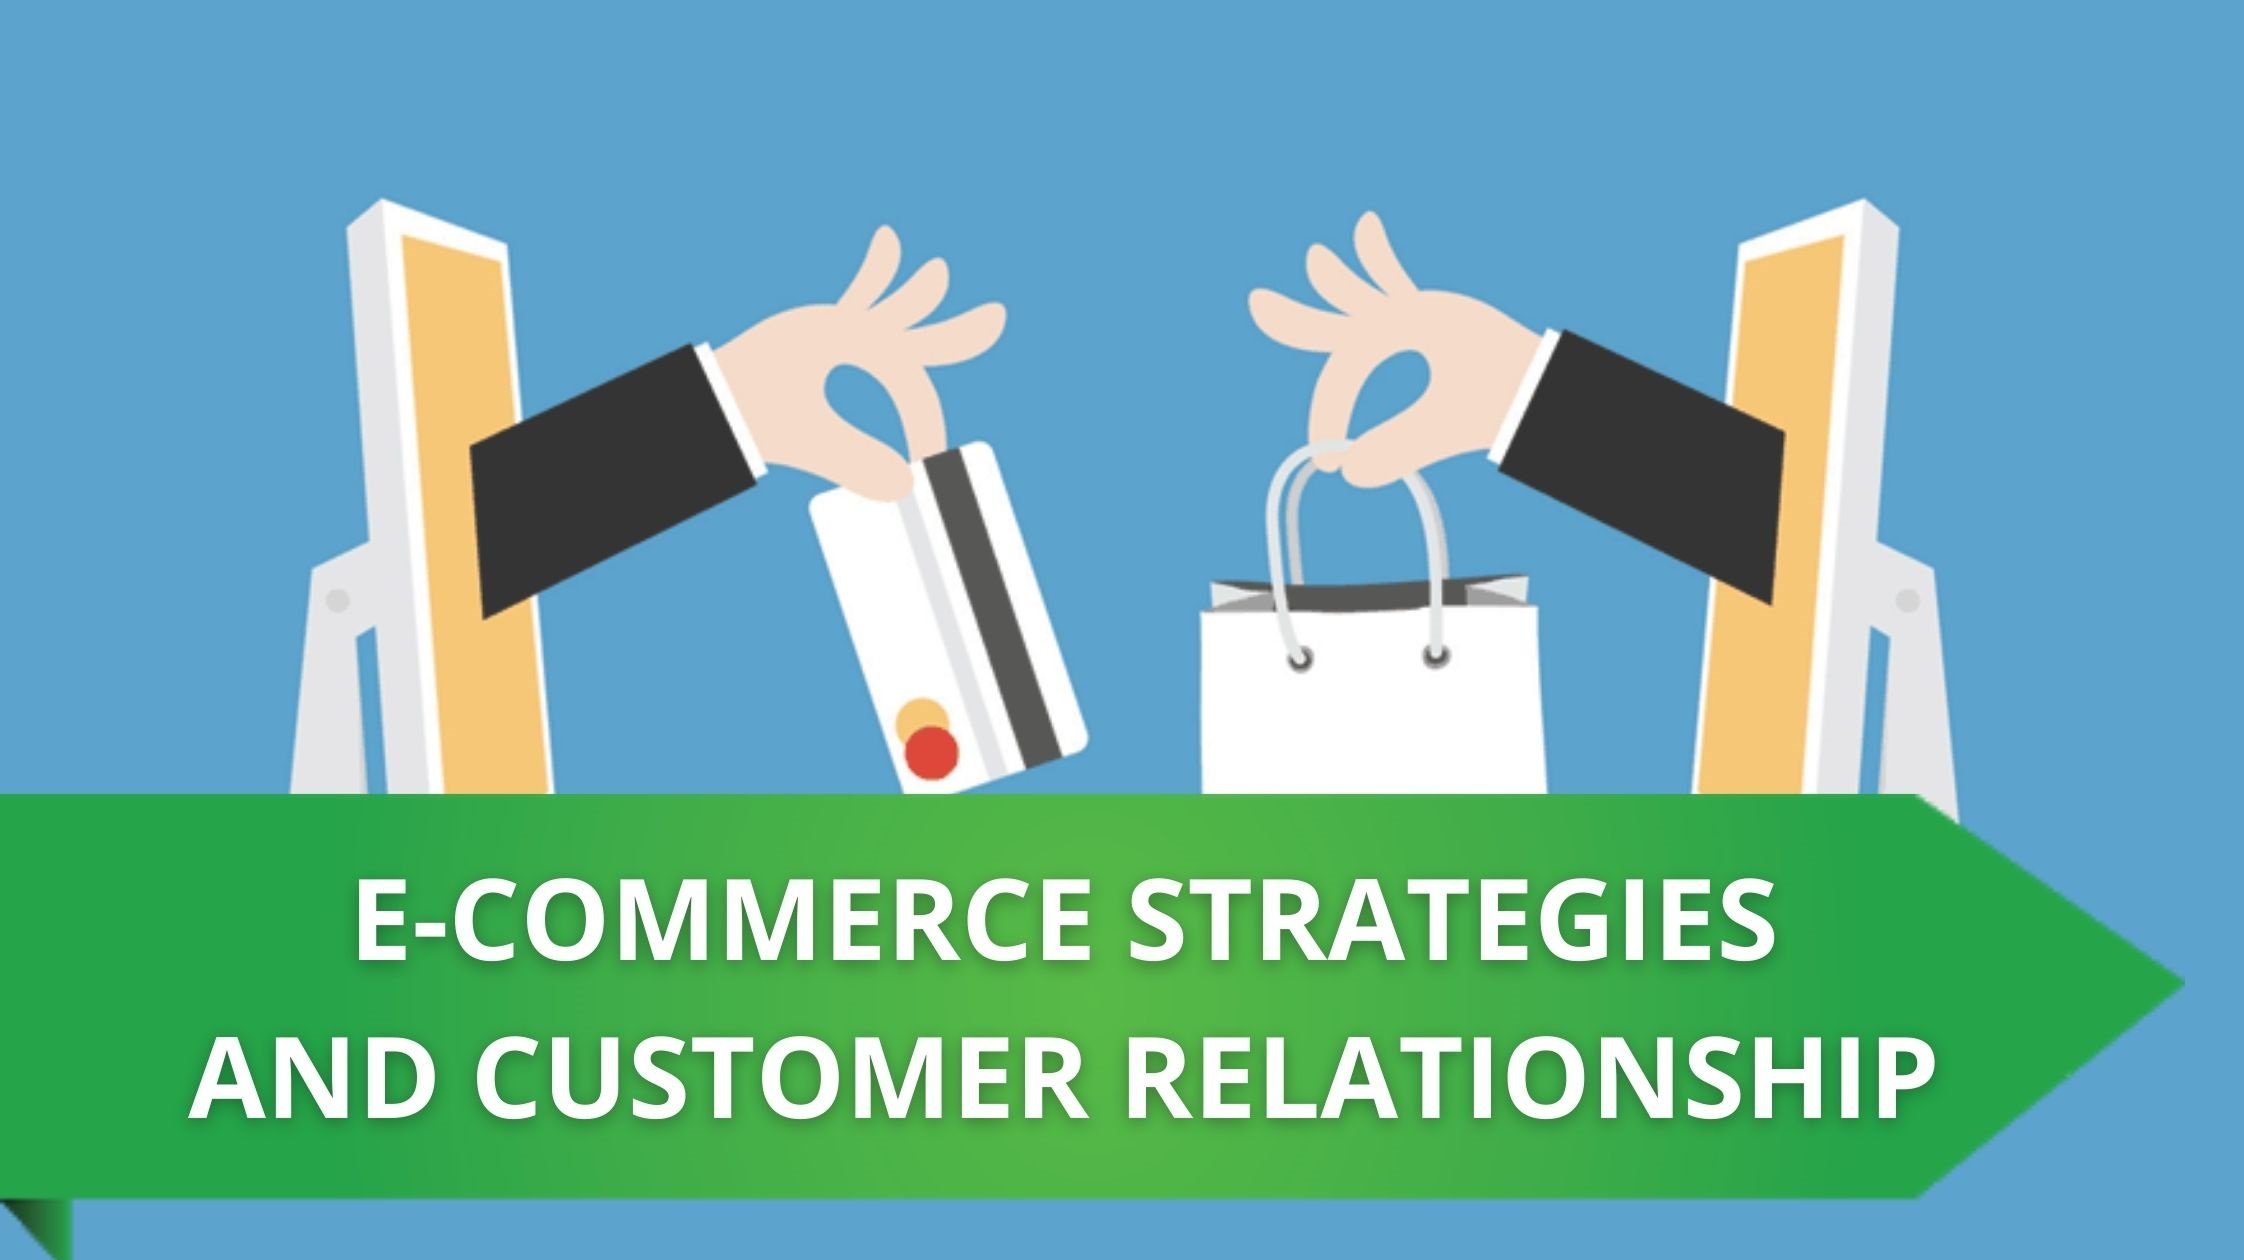 HOW CAN E-COMMERCE STRATEGIES BUILD A BETTER CUSTOMER RELATIONSHIP?